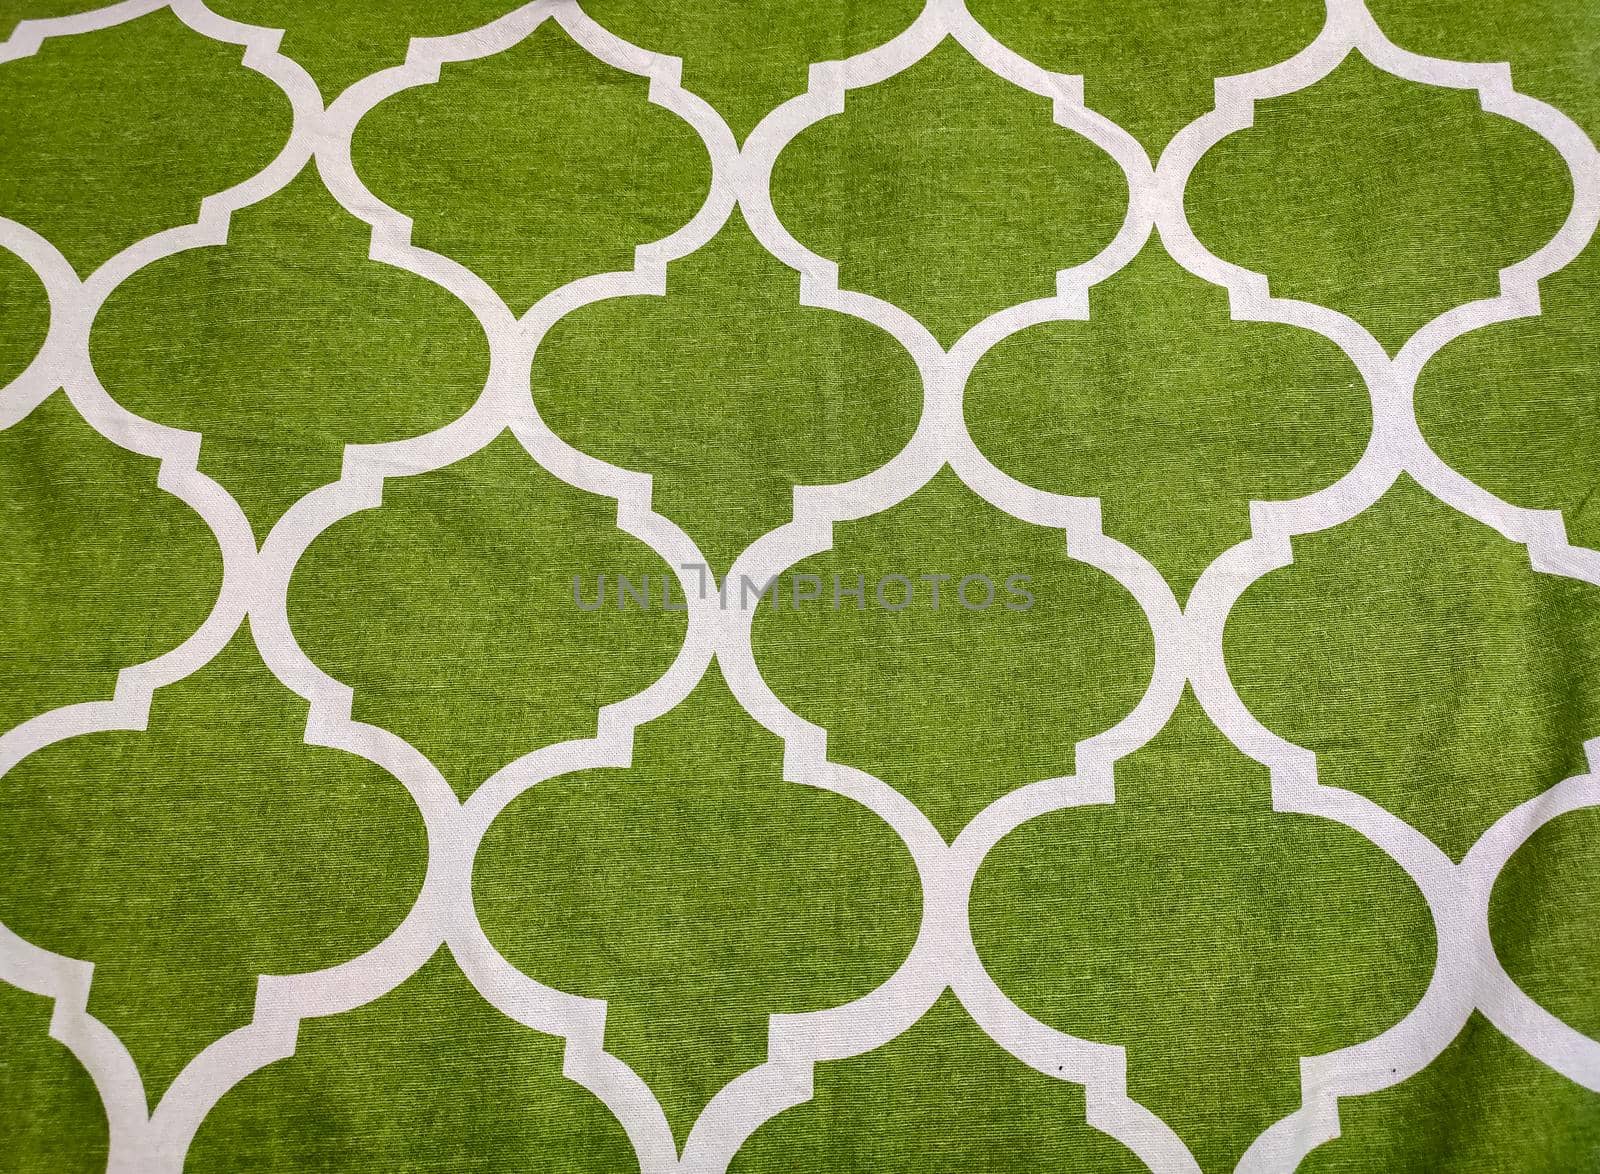 Colorful Close-up image of of design on cotton carpet at home. Can be used as background by lalam